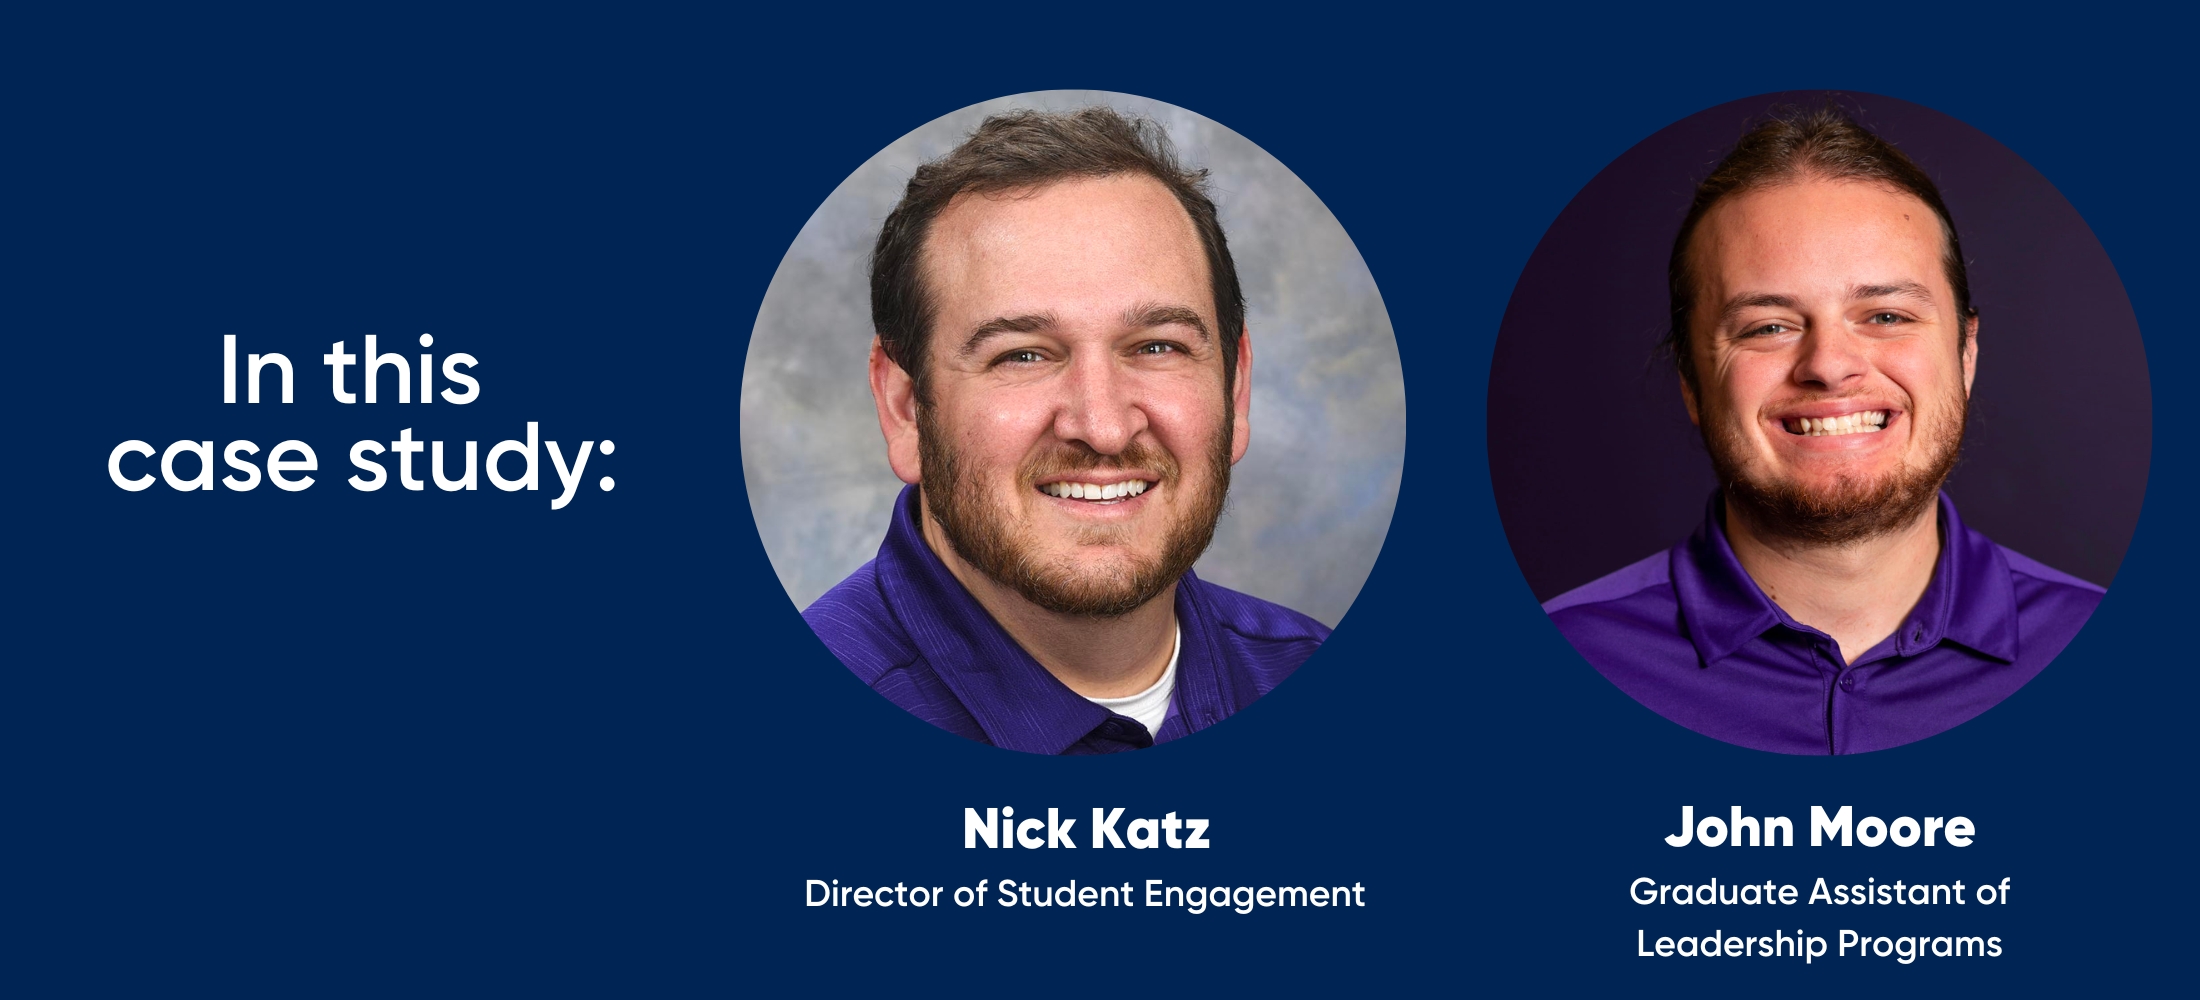 In this case study: Nick Katz, Director of Student Engagement and John Moore, Graduate Assistant of Leadership Programs 